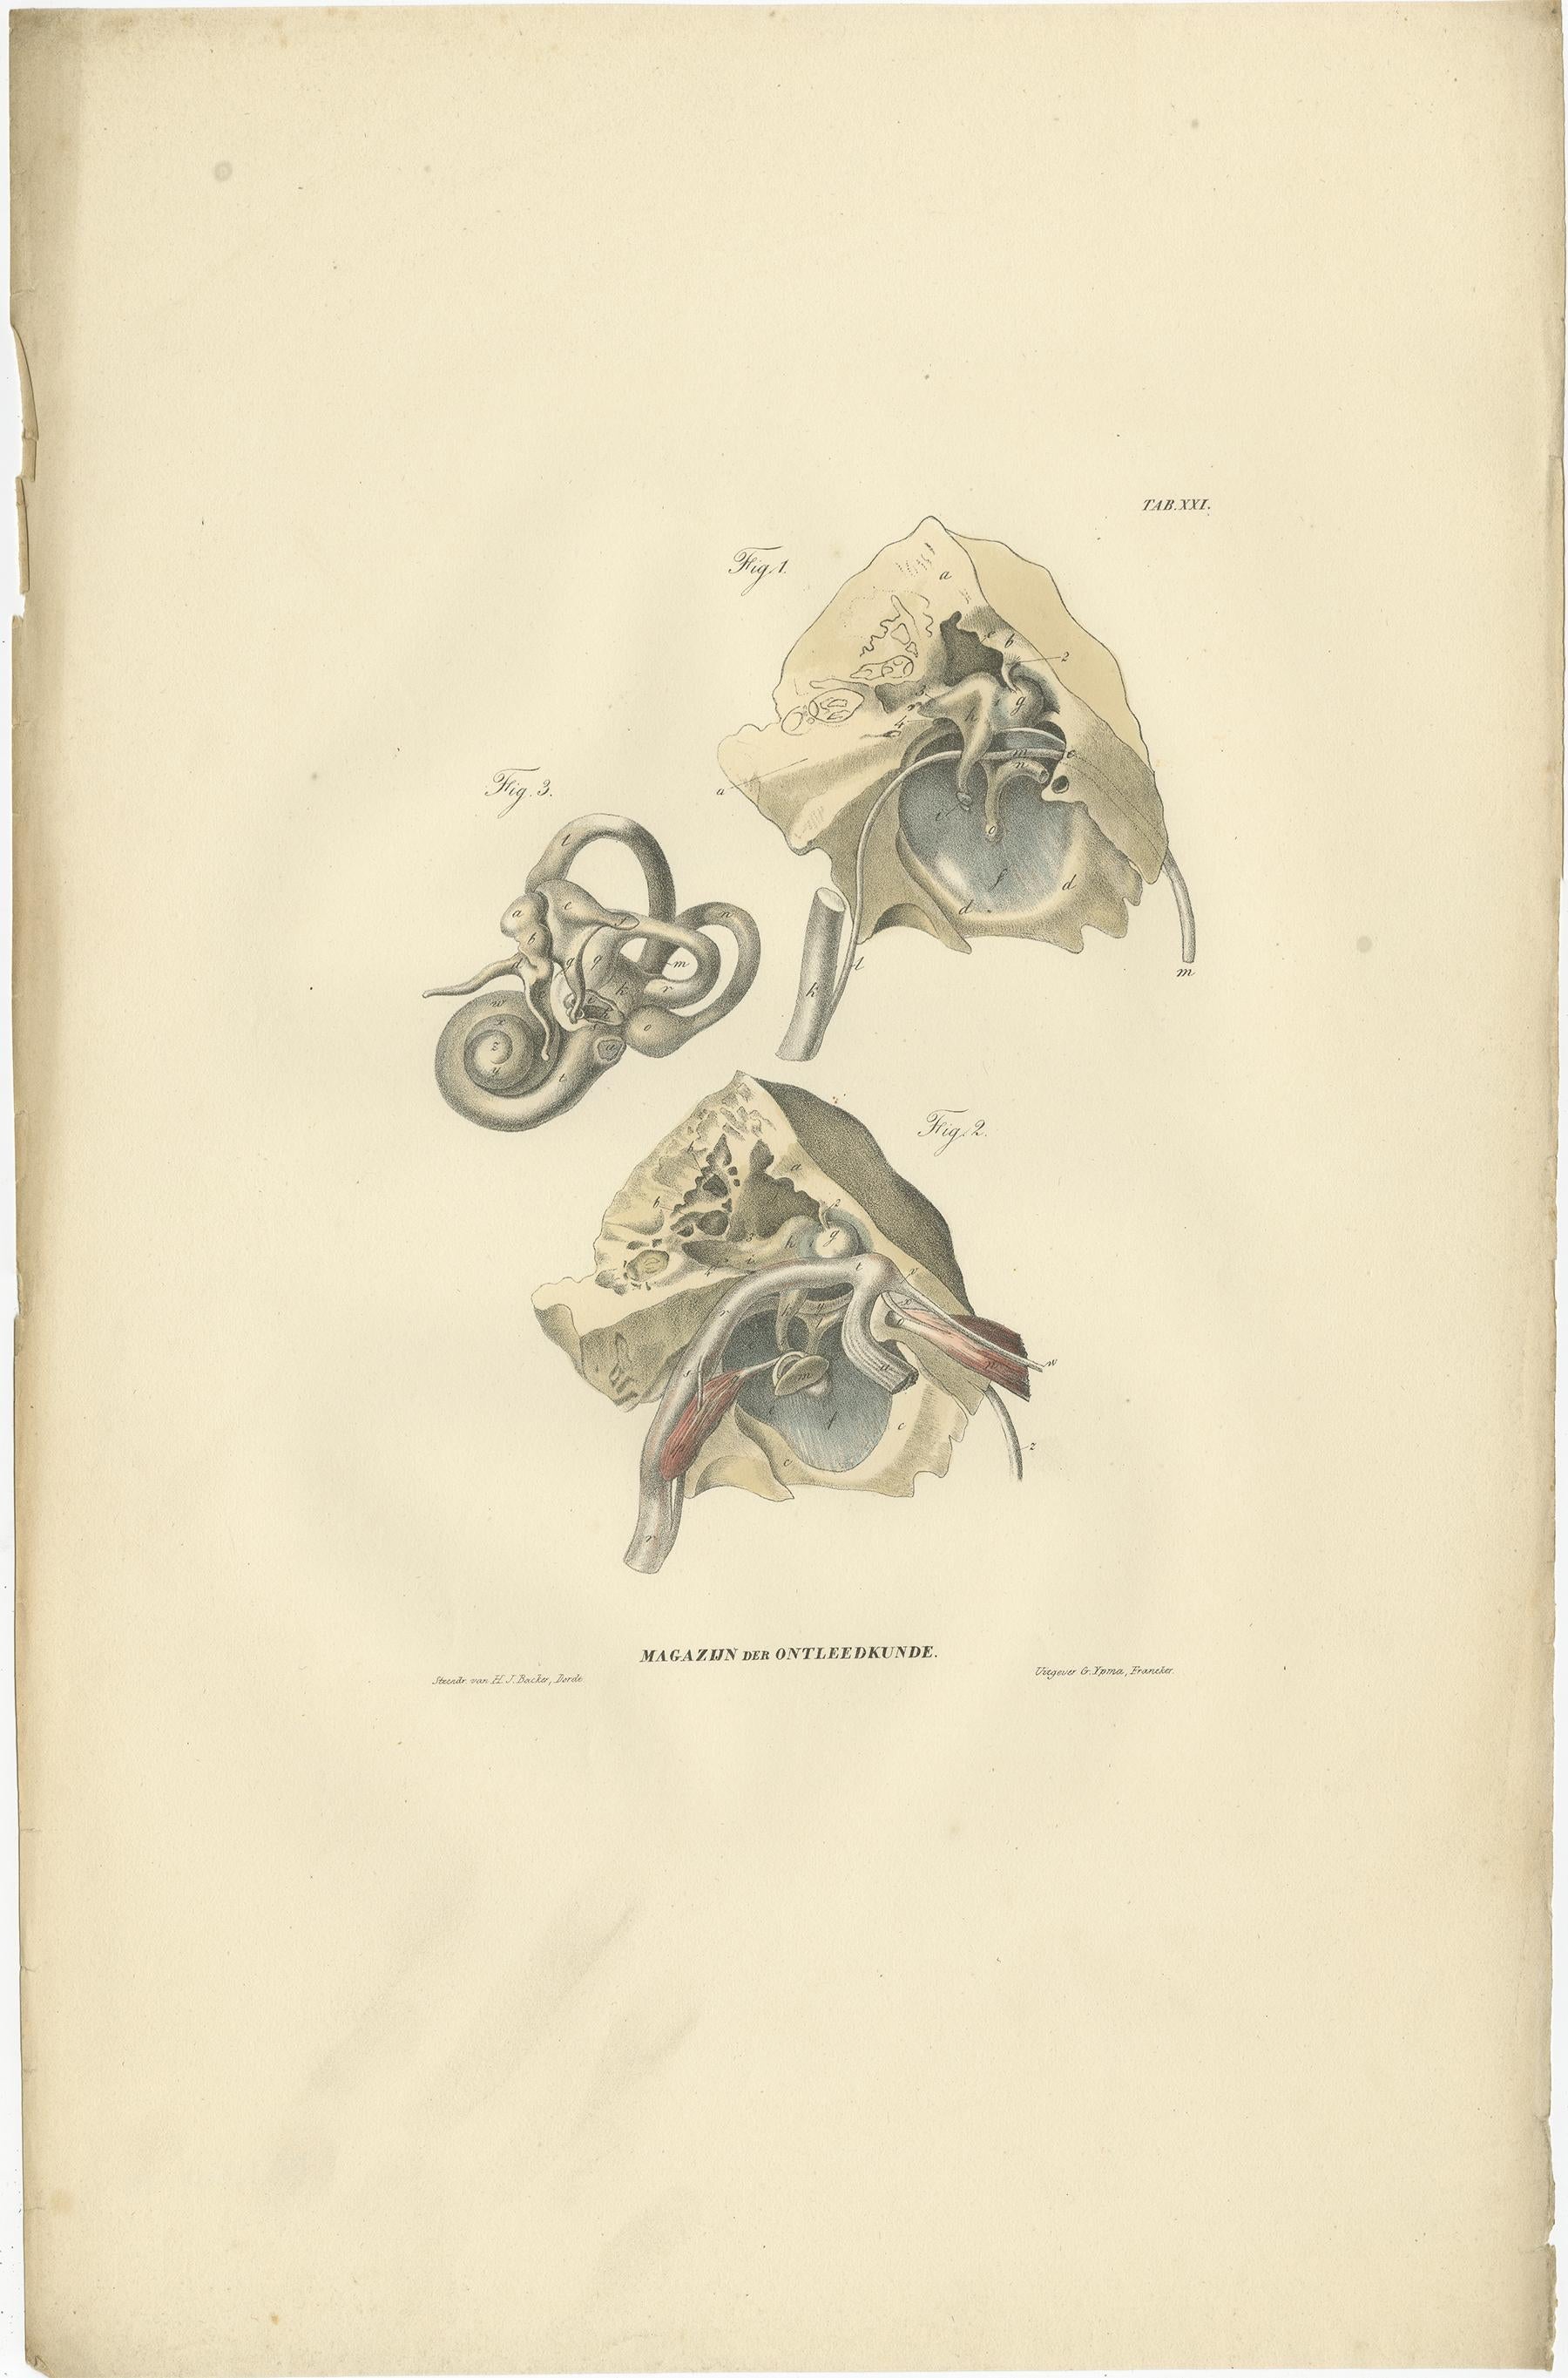 Set of 13 antique anatomy prints of ligaments and joints. These prints originate from 'Magazijn van ontleedkunde' by Dr. Th. Richter. Published 1839.